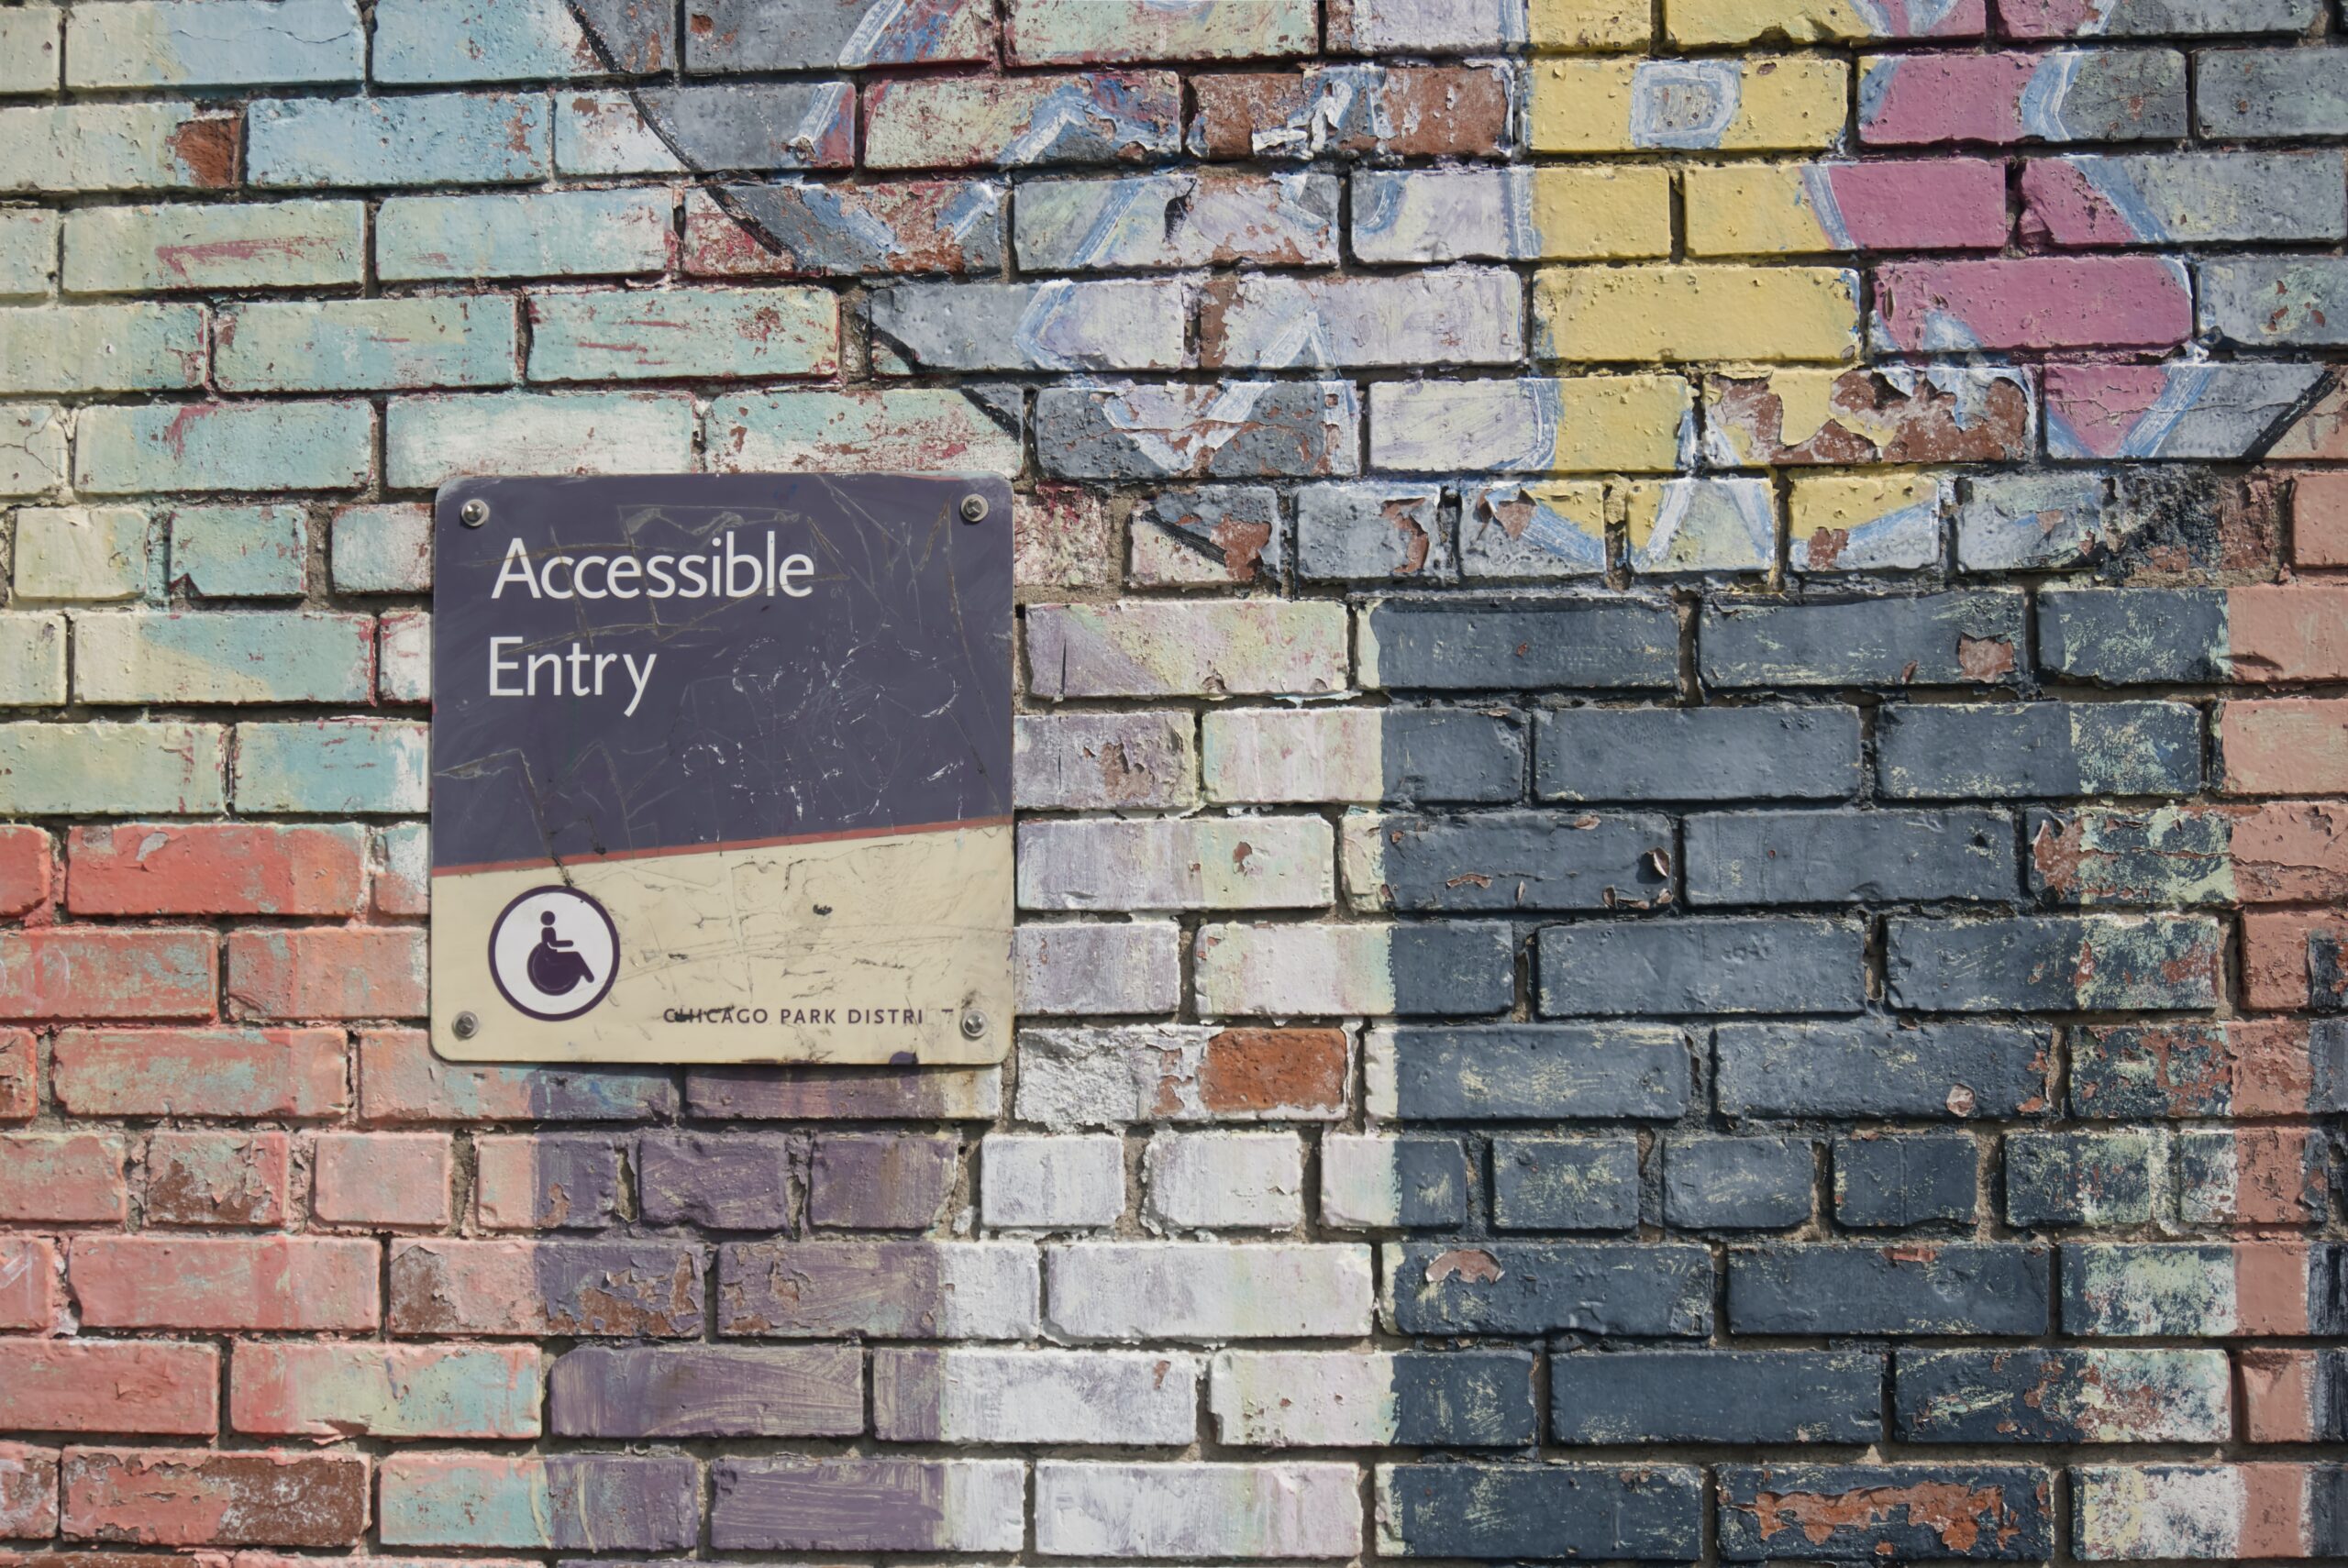 Brick wall with graffiti next to sign that reads "Accessible entry" with a small wheelchair symbol. The sign is from the Chicago Parks District.